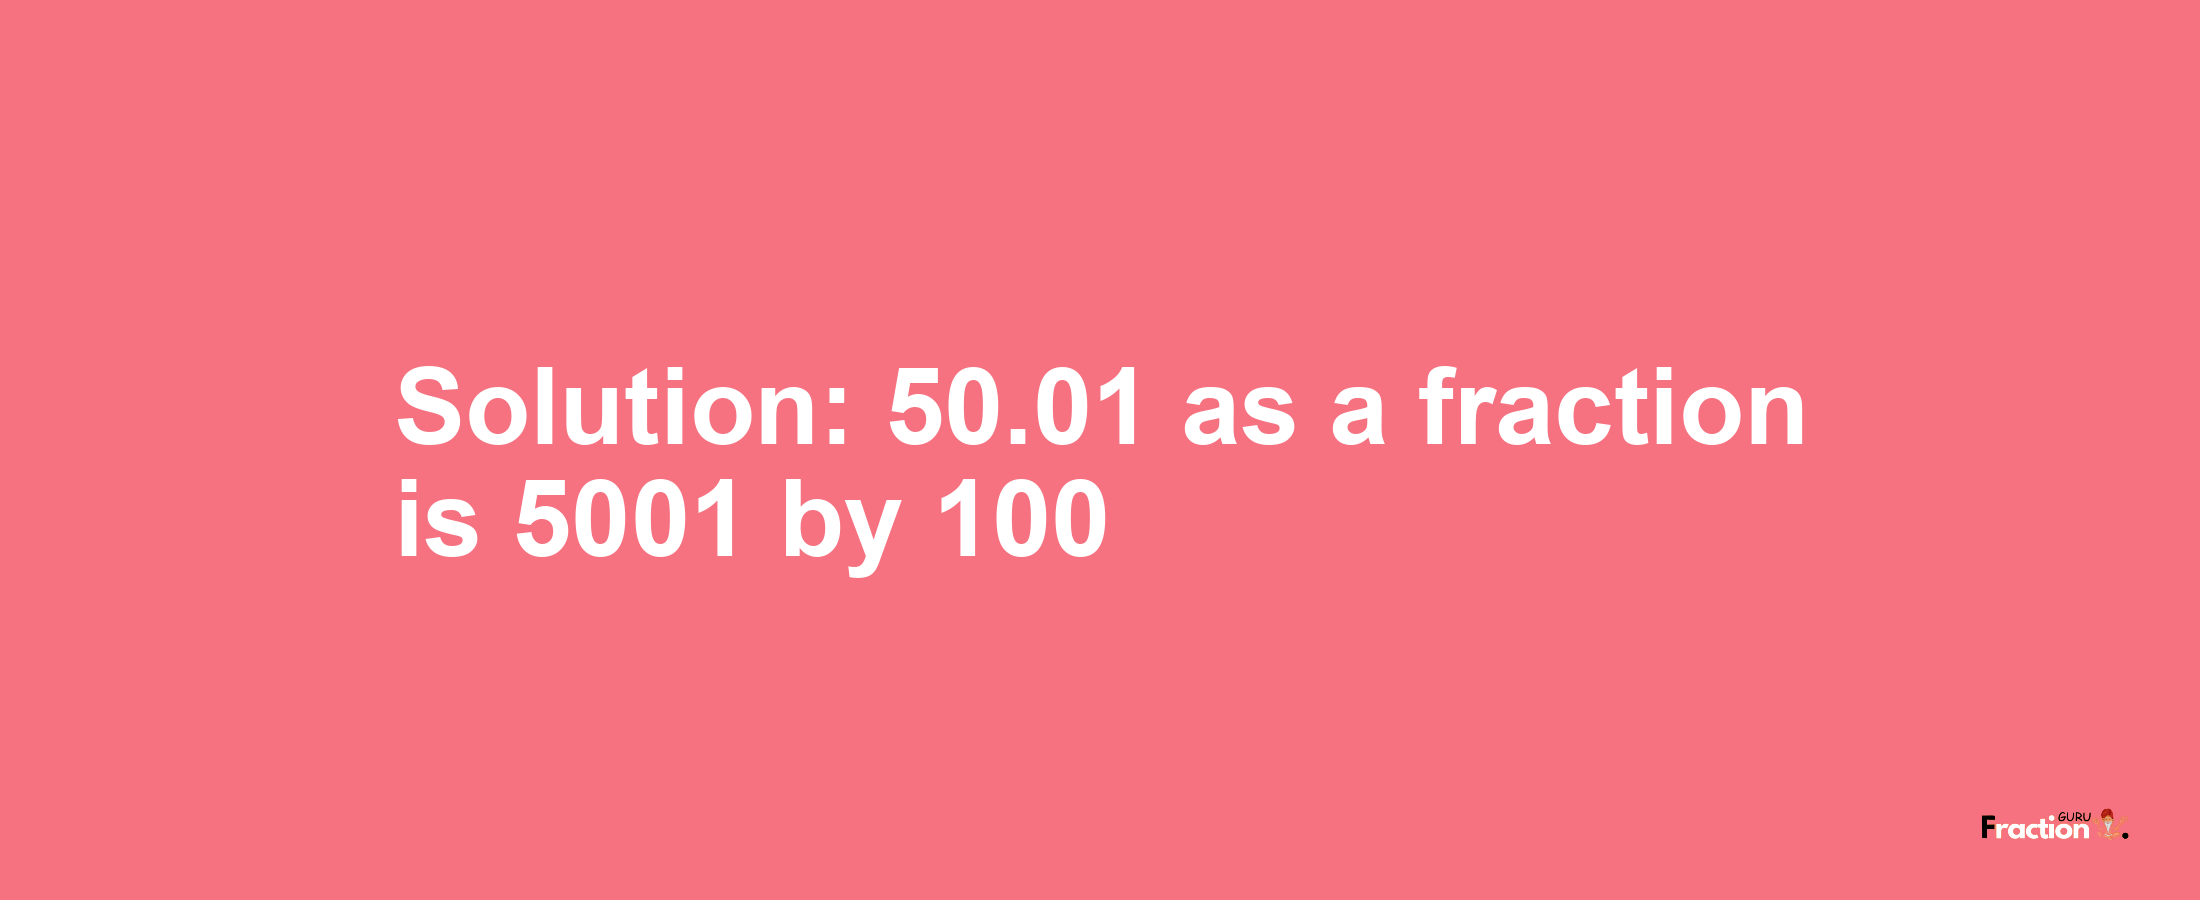 Solution:50.01 as a fraction is 5001/100